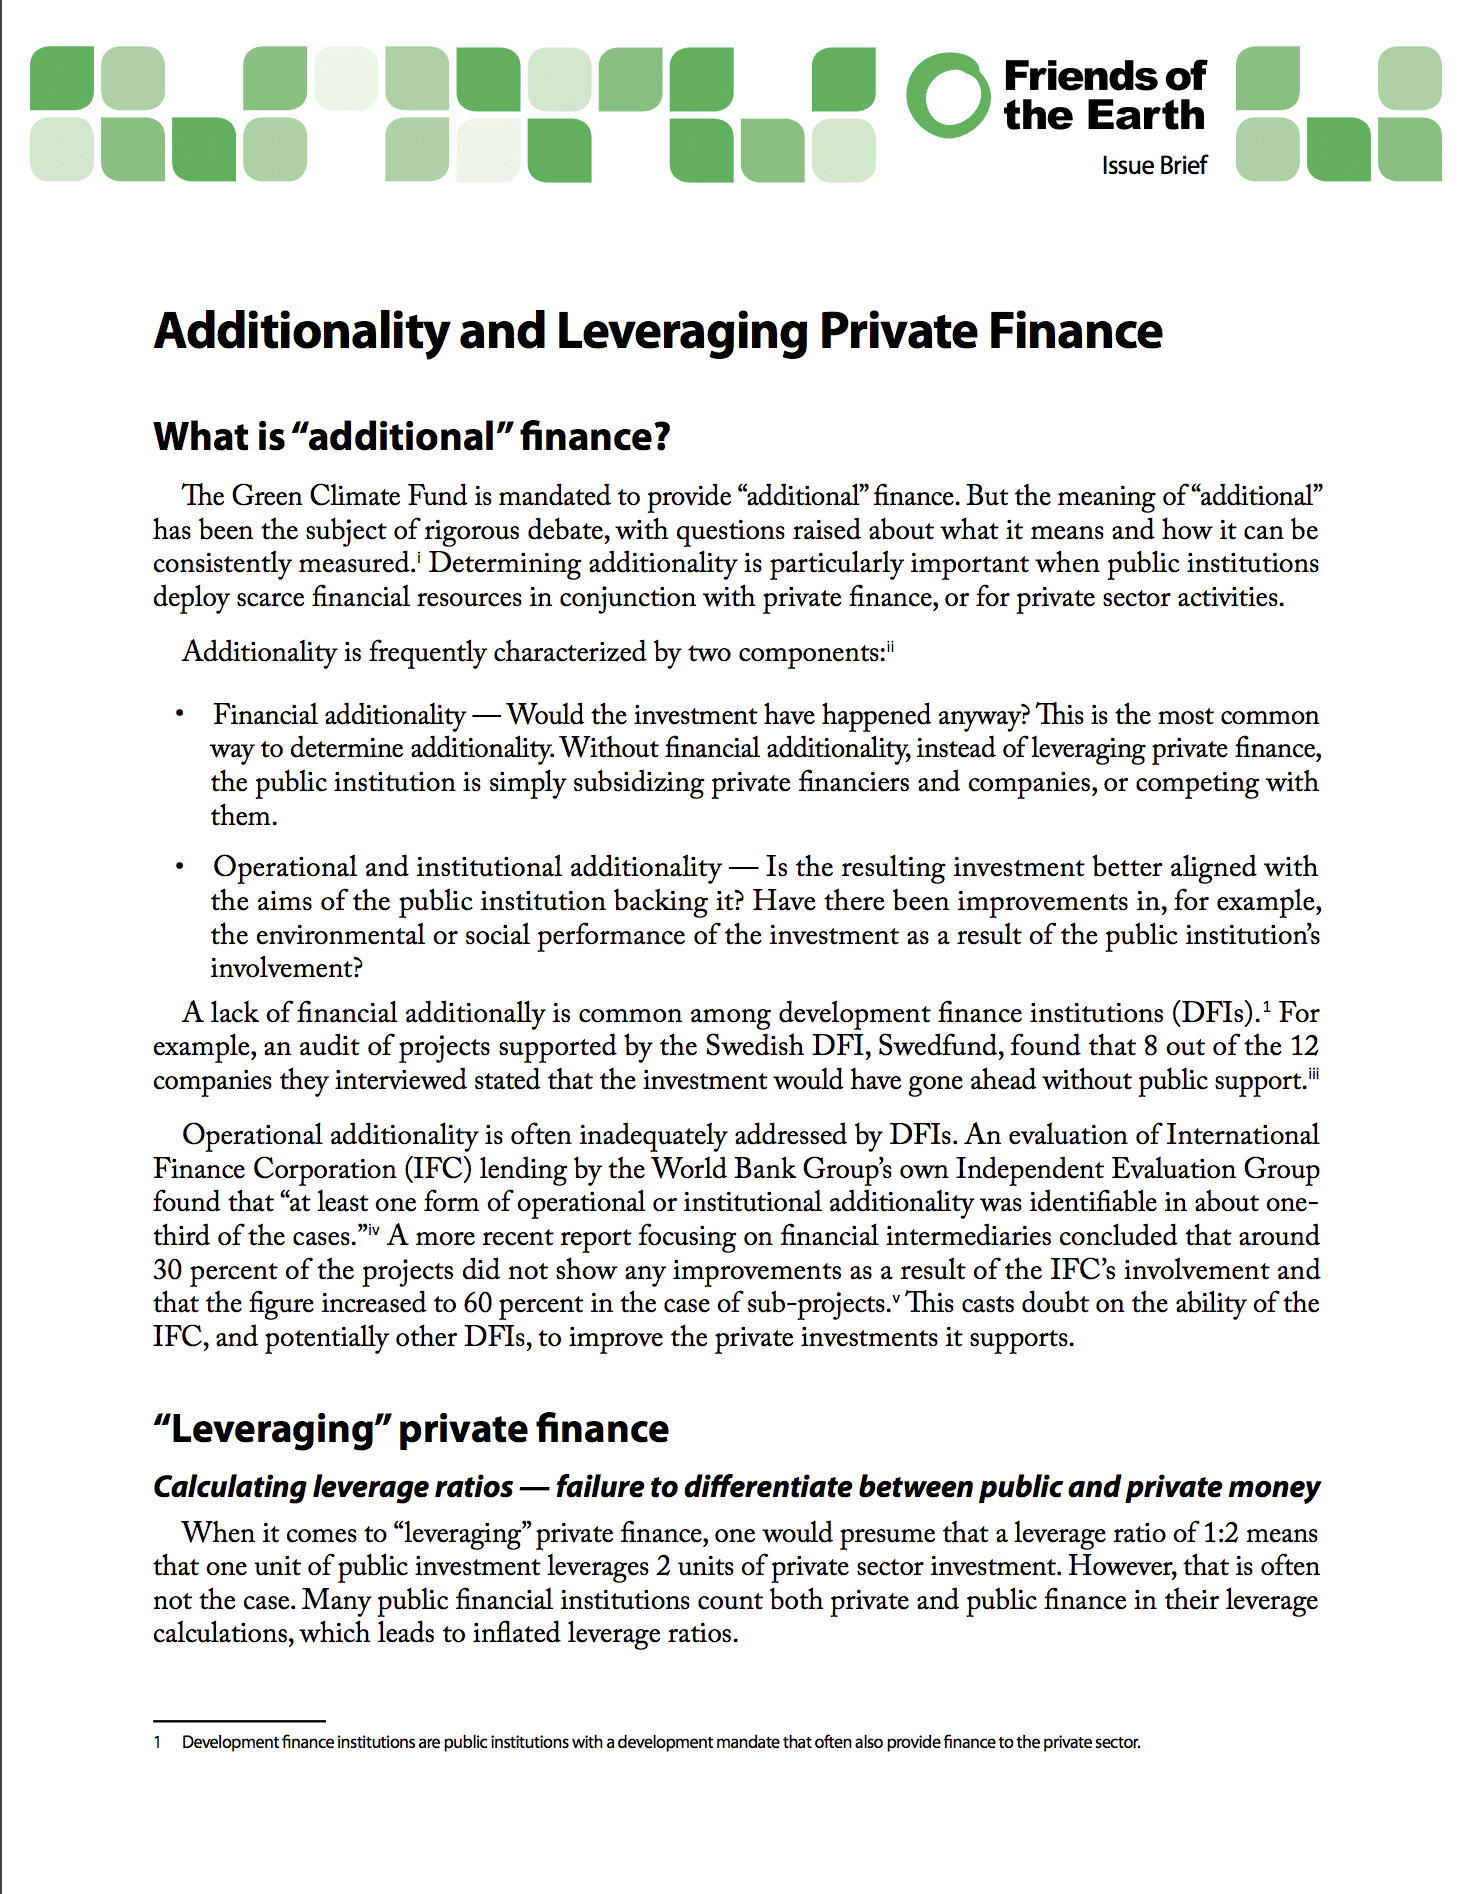 Additionally and Leveraging Private Finance